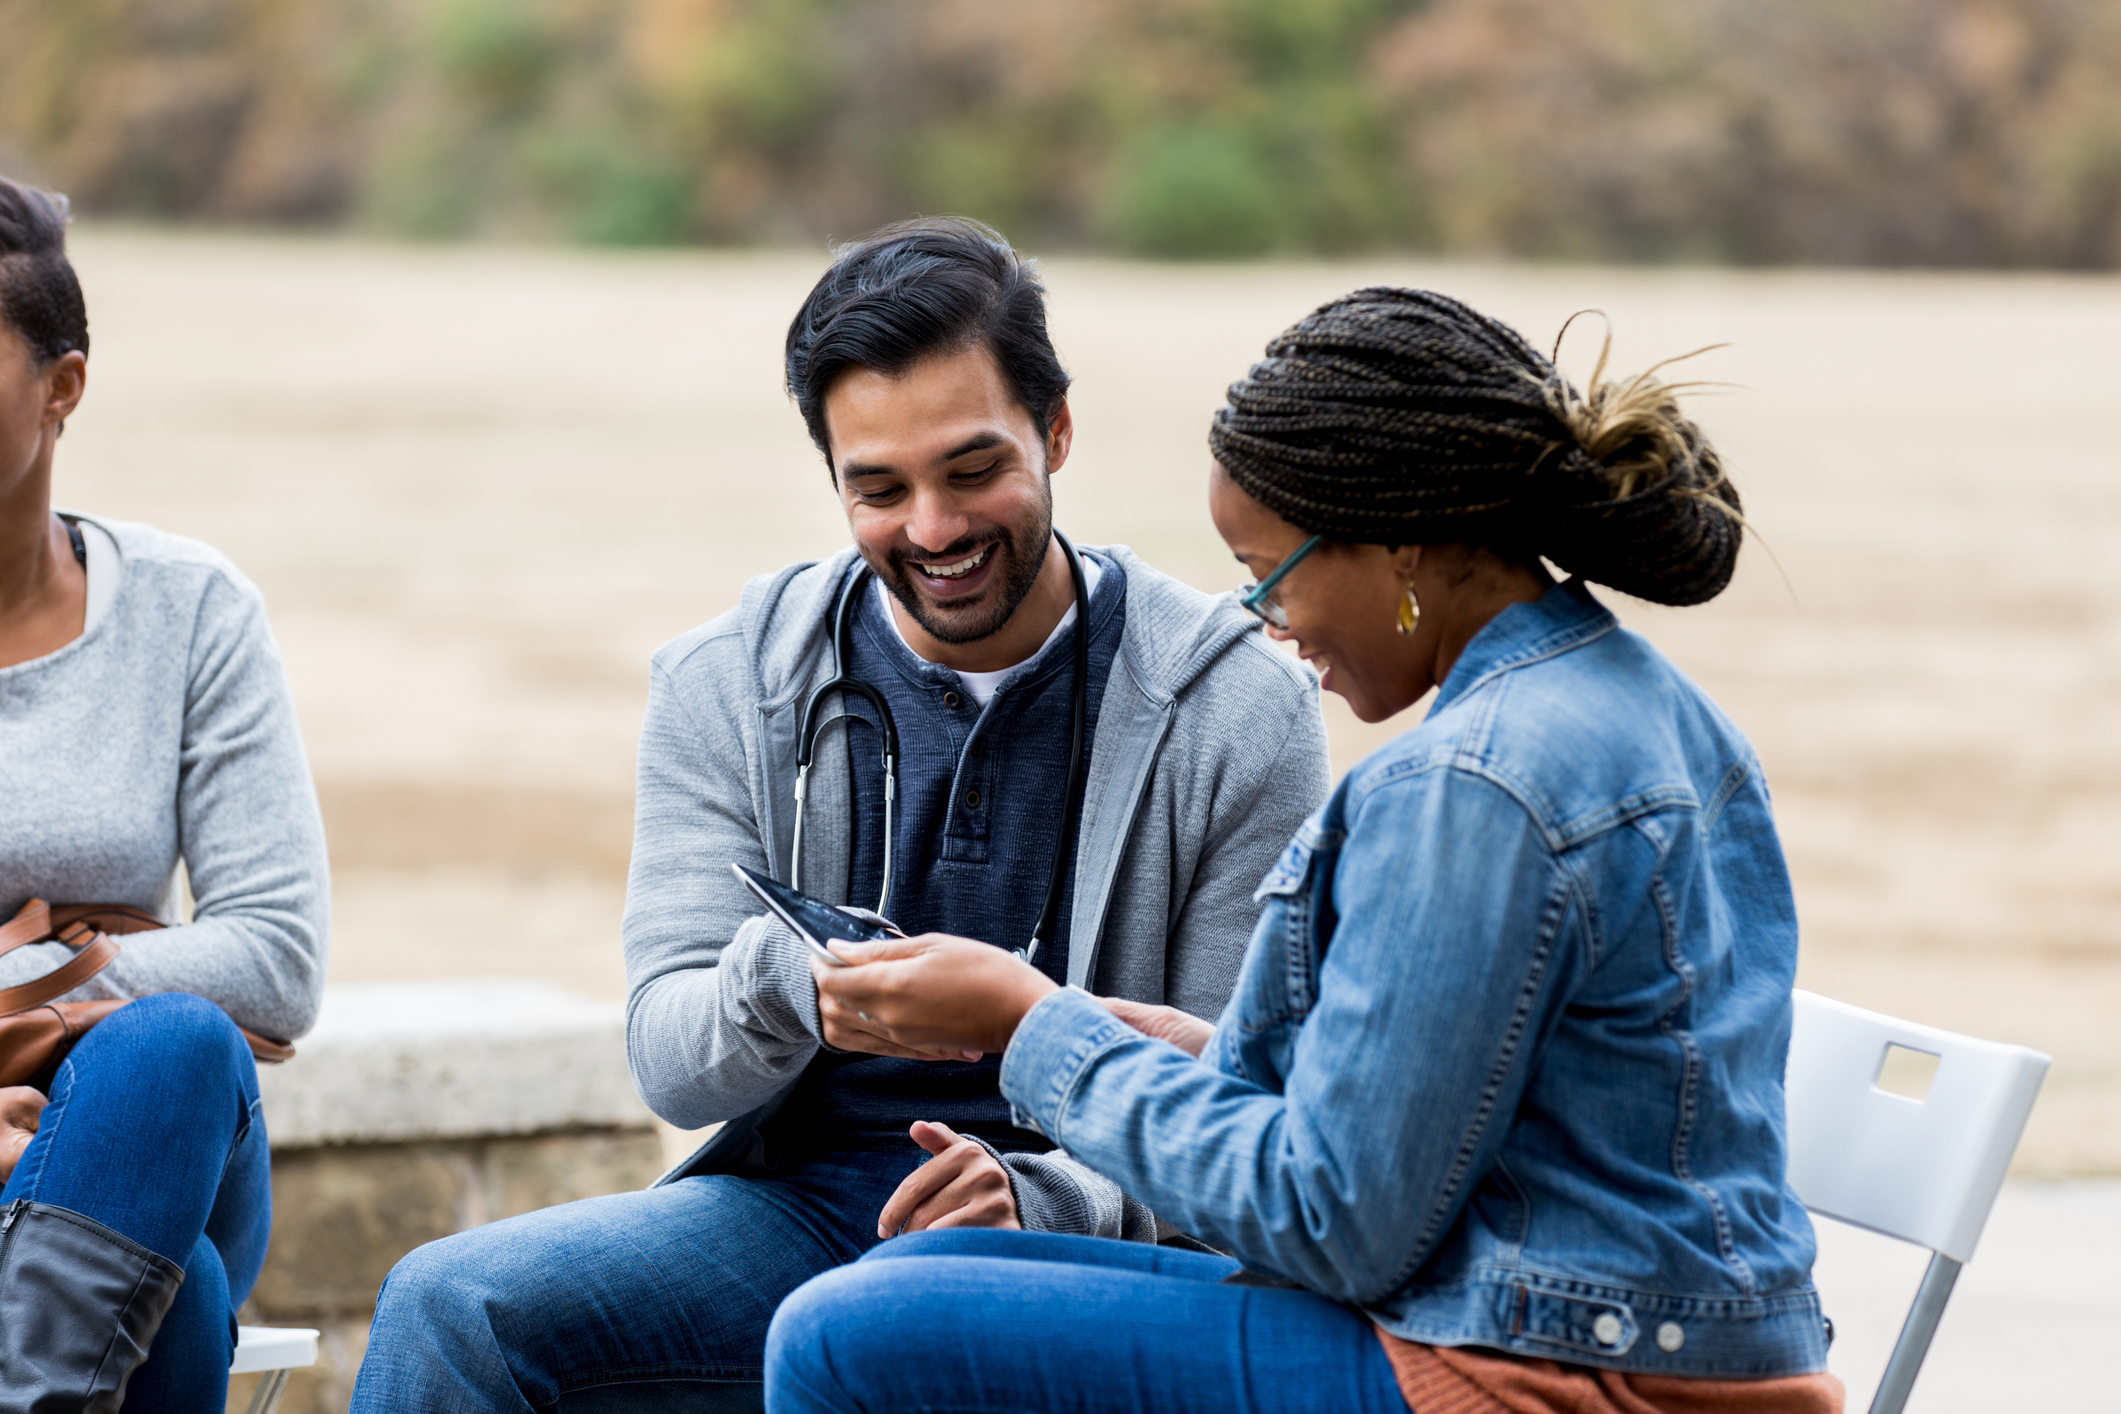 Two people, one with a stethoscope, sit close together looking at a digital tablet and smiling.